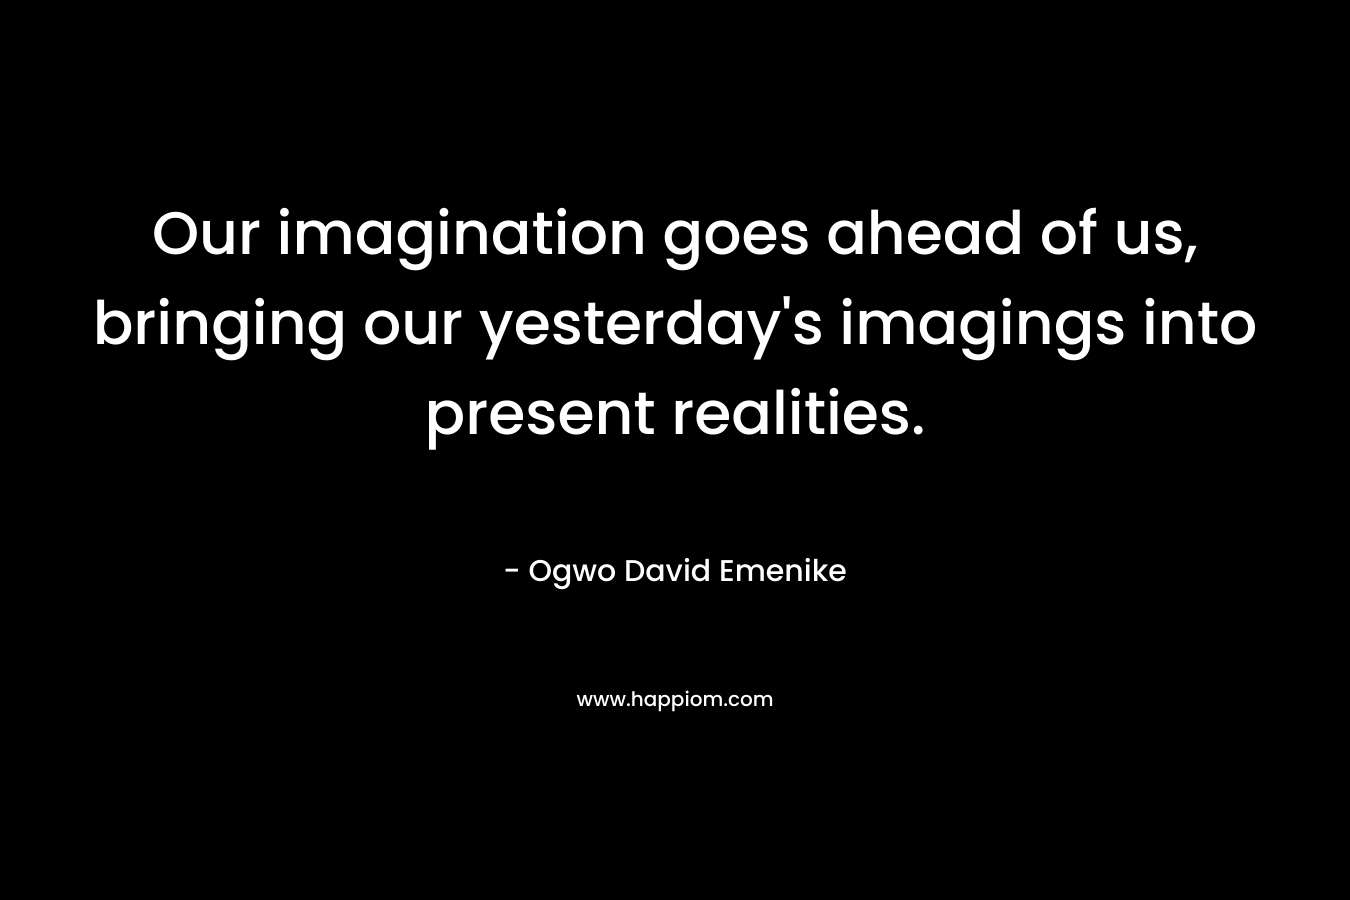 Our imagination goes ahead of us, bringing our yesterday's imagings into present realities.